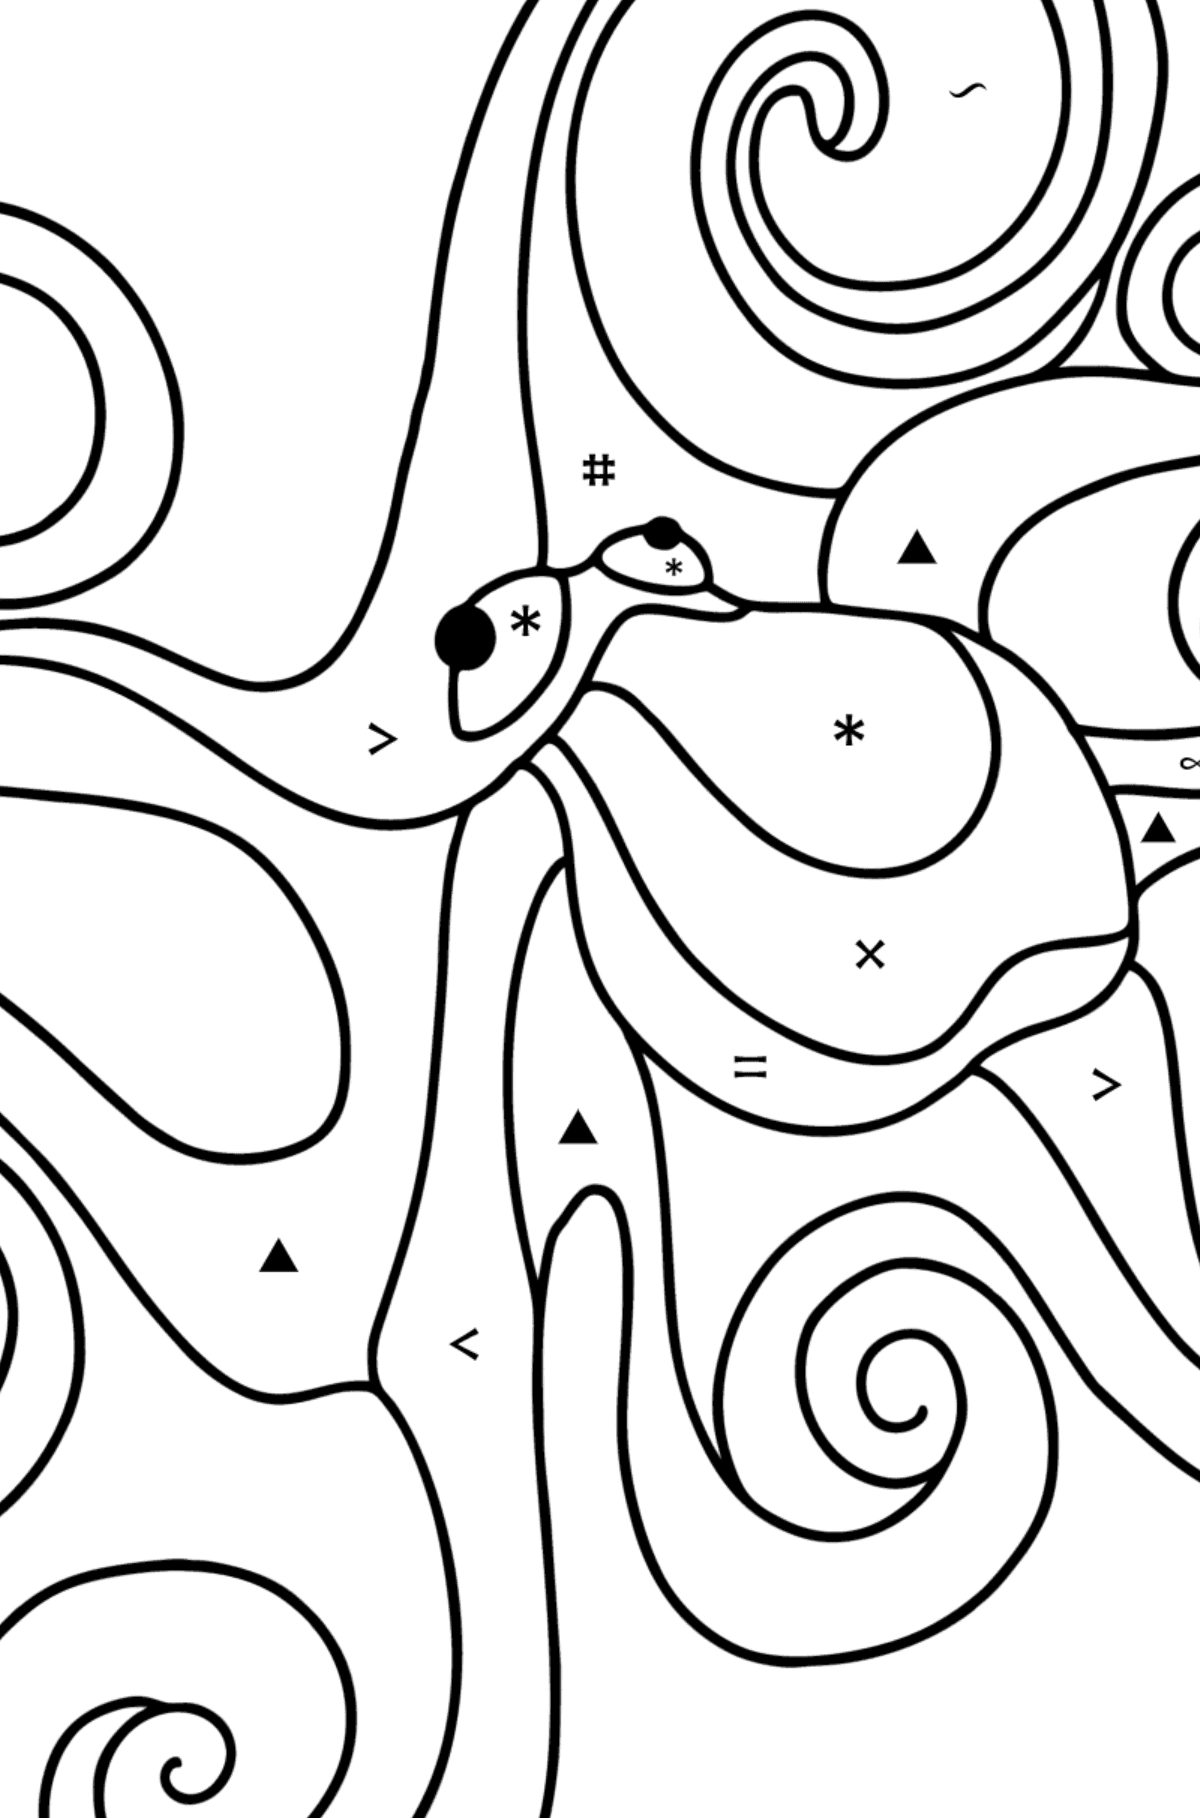 Common octopus coloring page - Coloring by Symbols for Kids